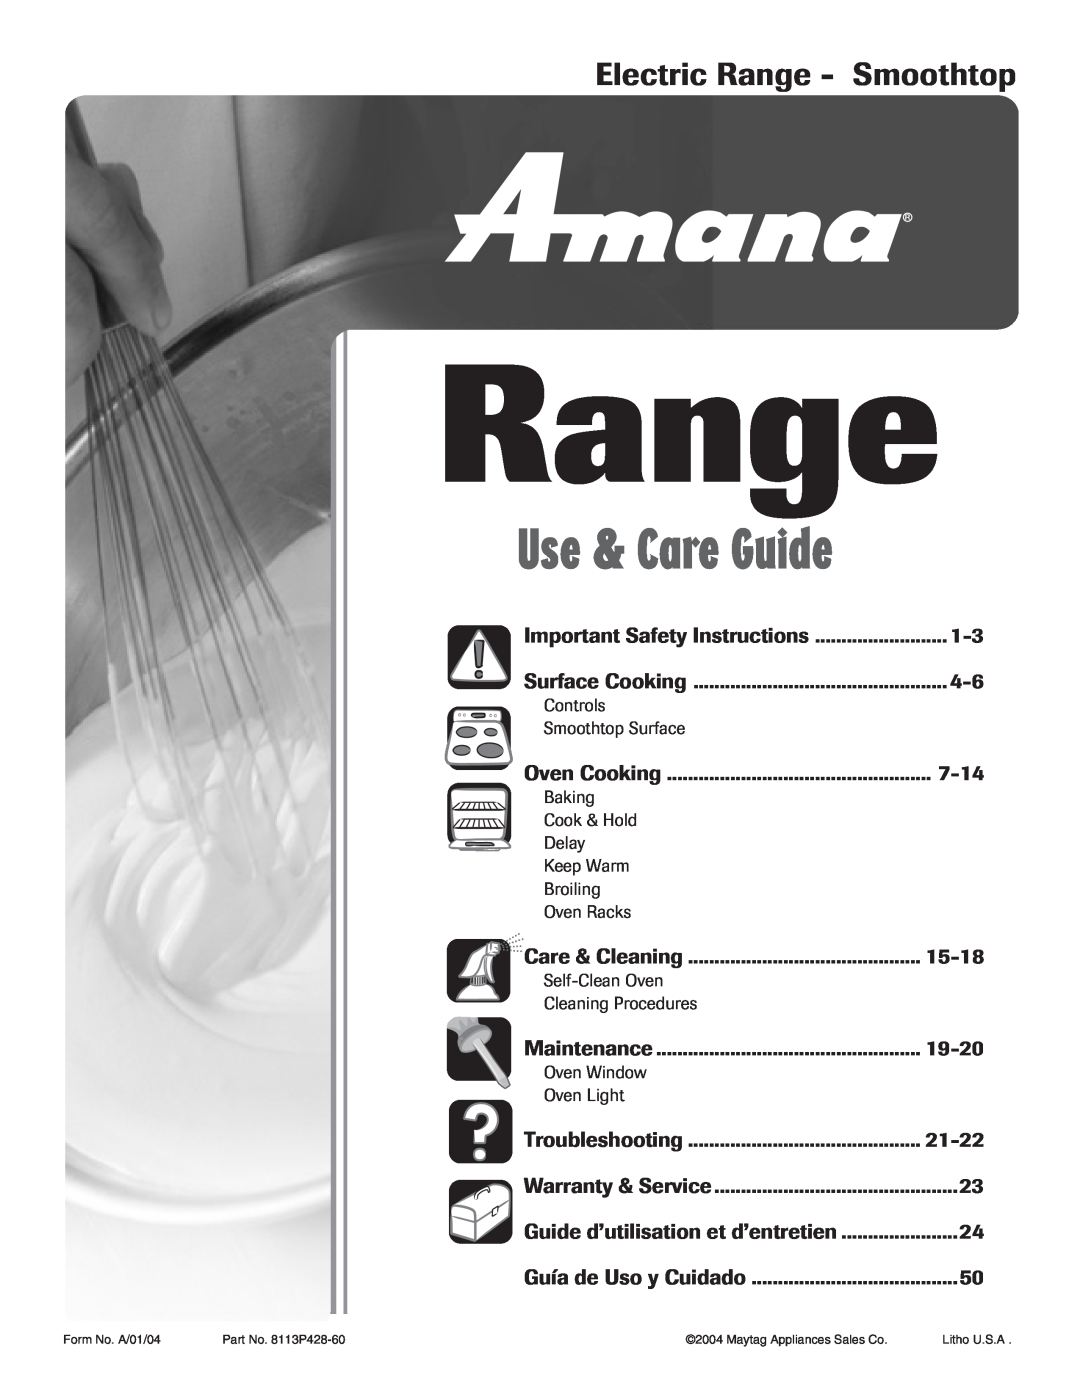 Amana important safety instructions Use & Care Guide, Electric Range - Smoothtop 